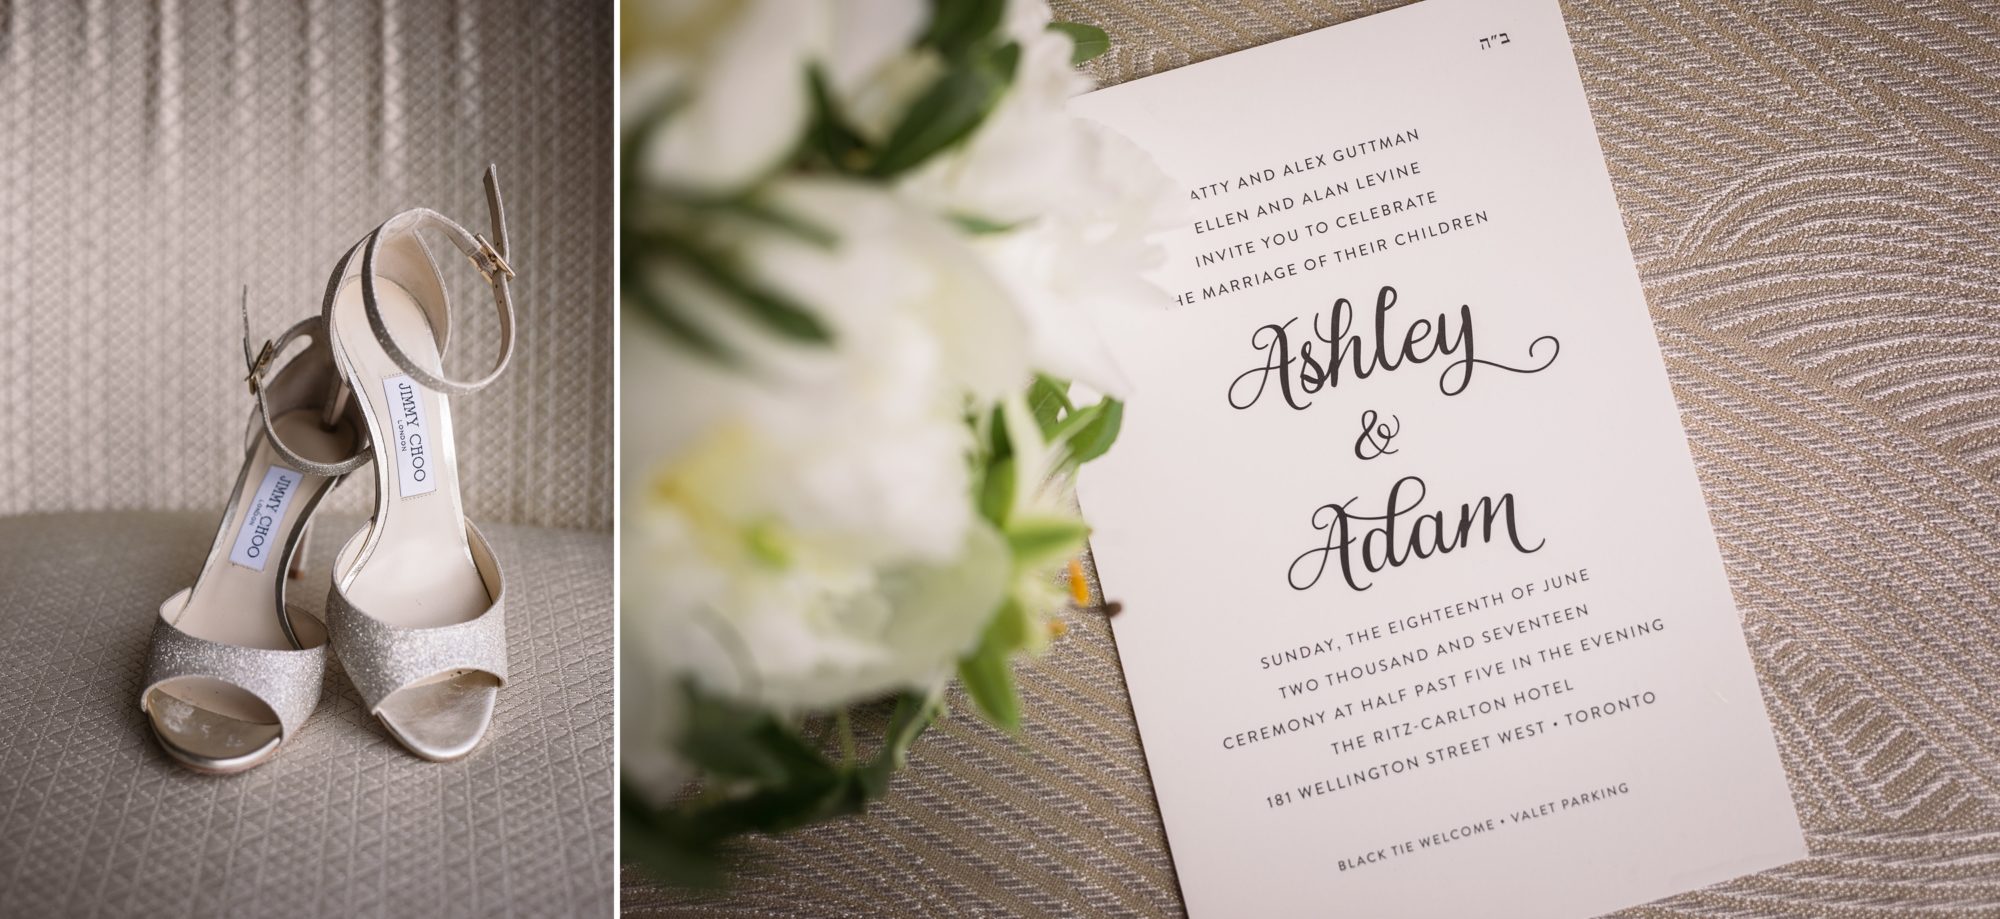 Details of the bride's silver wedding heels and wedding invitation 